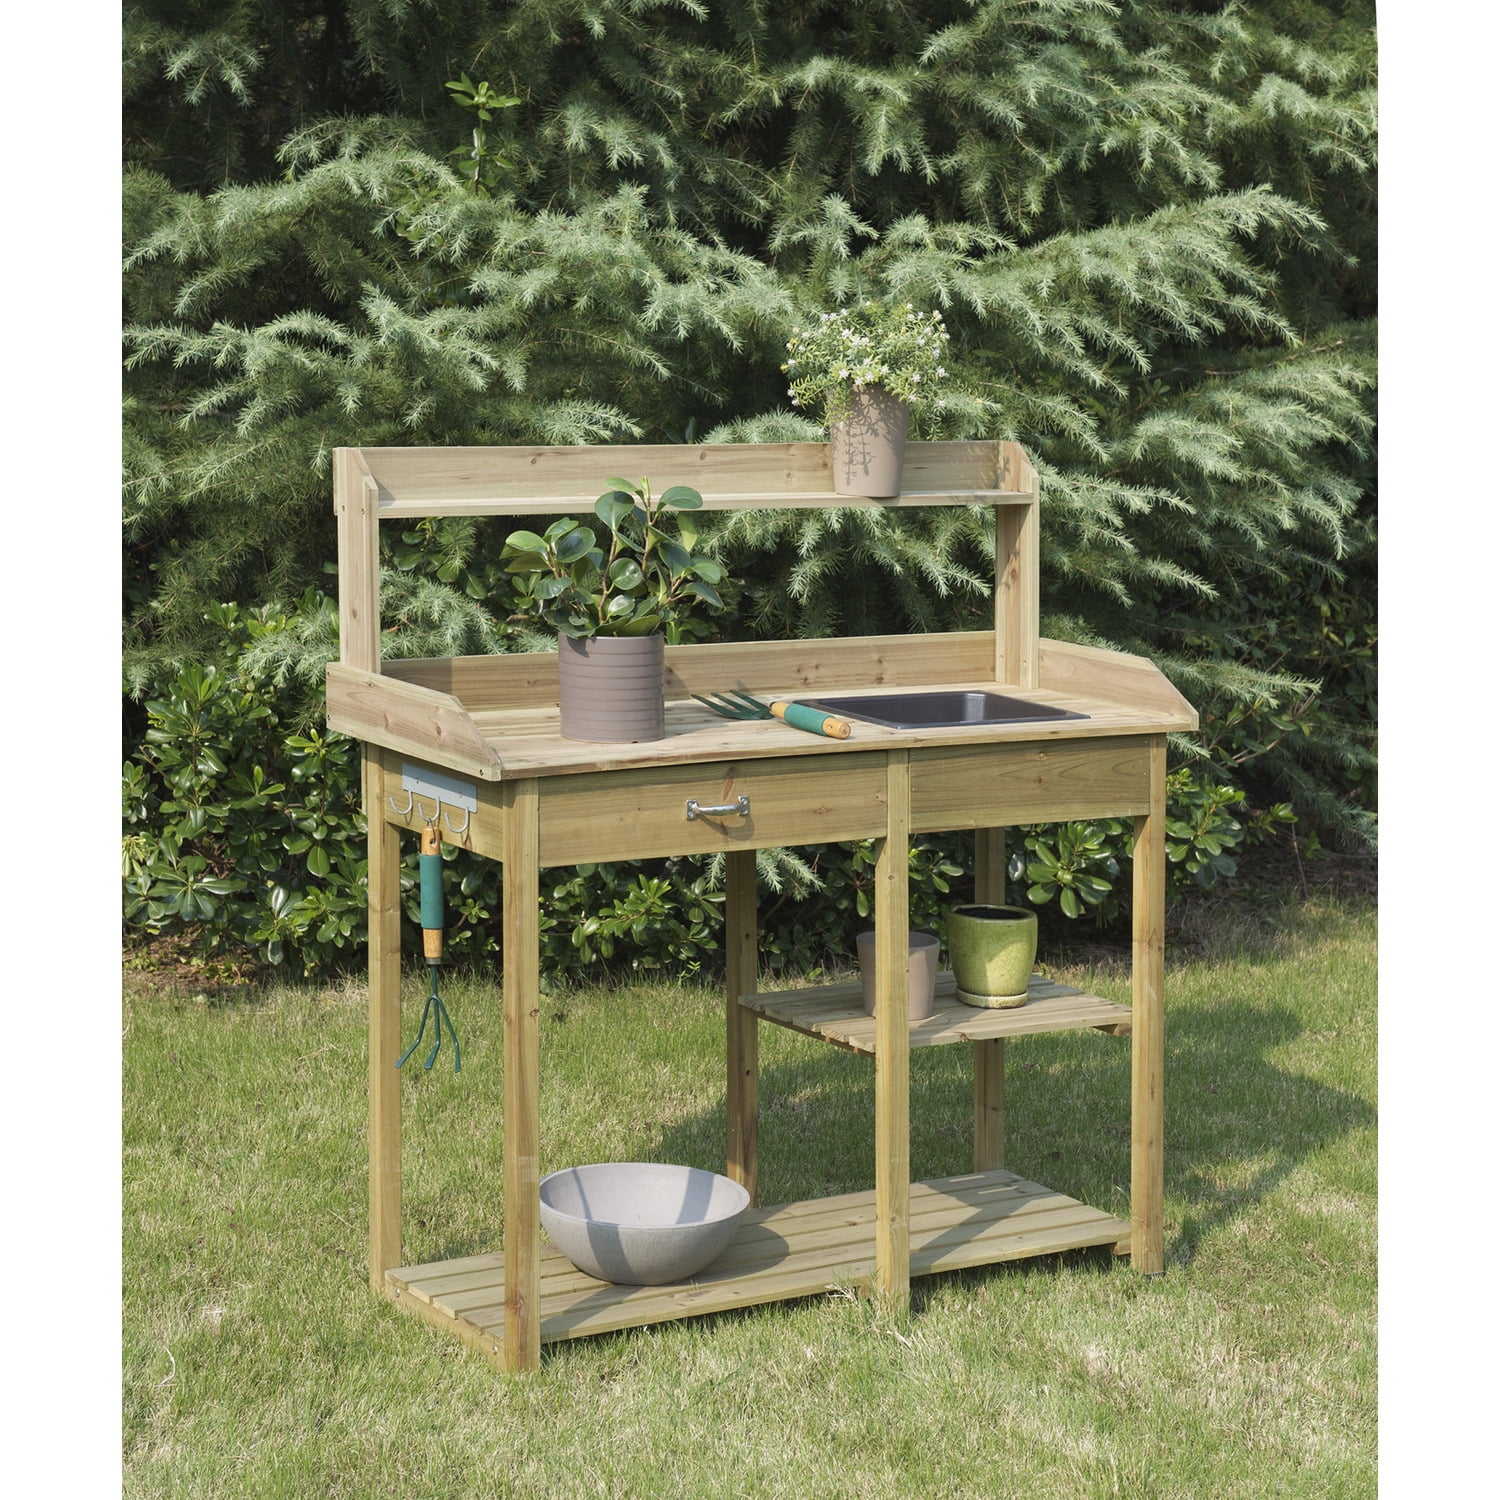 Picture of Convenience Concepts G10458N Planters & Potts Deluxe Potting Bench, Natural Fir